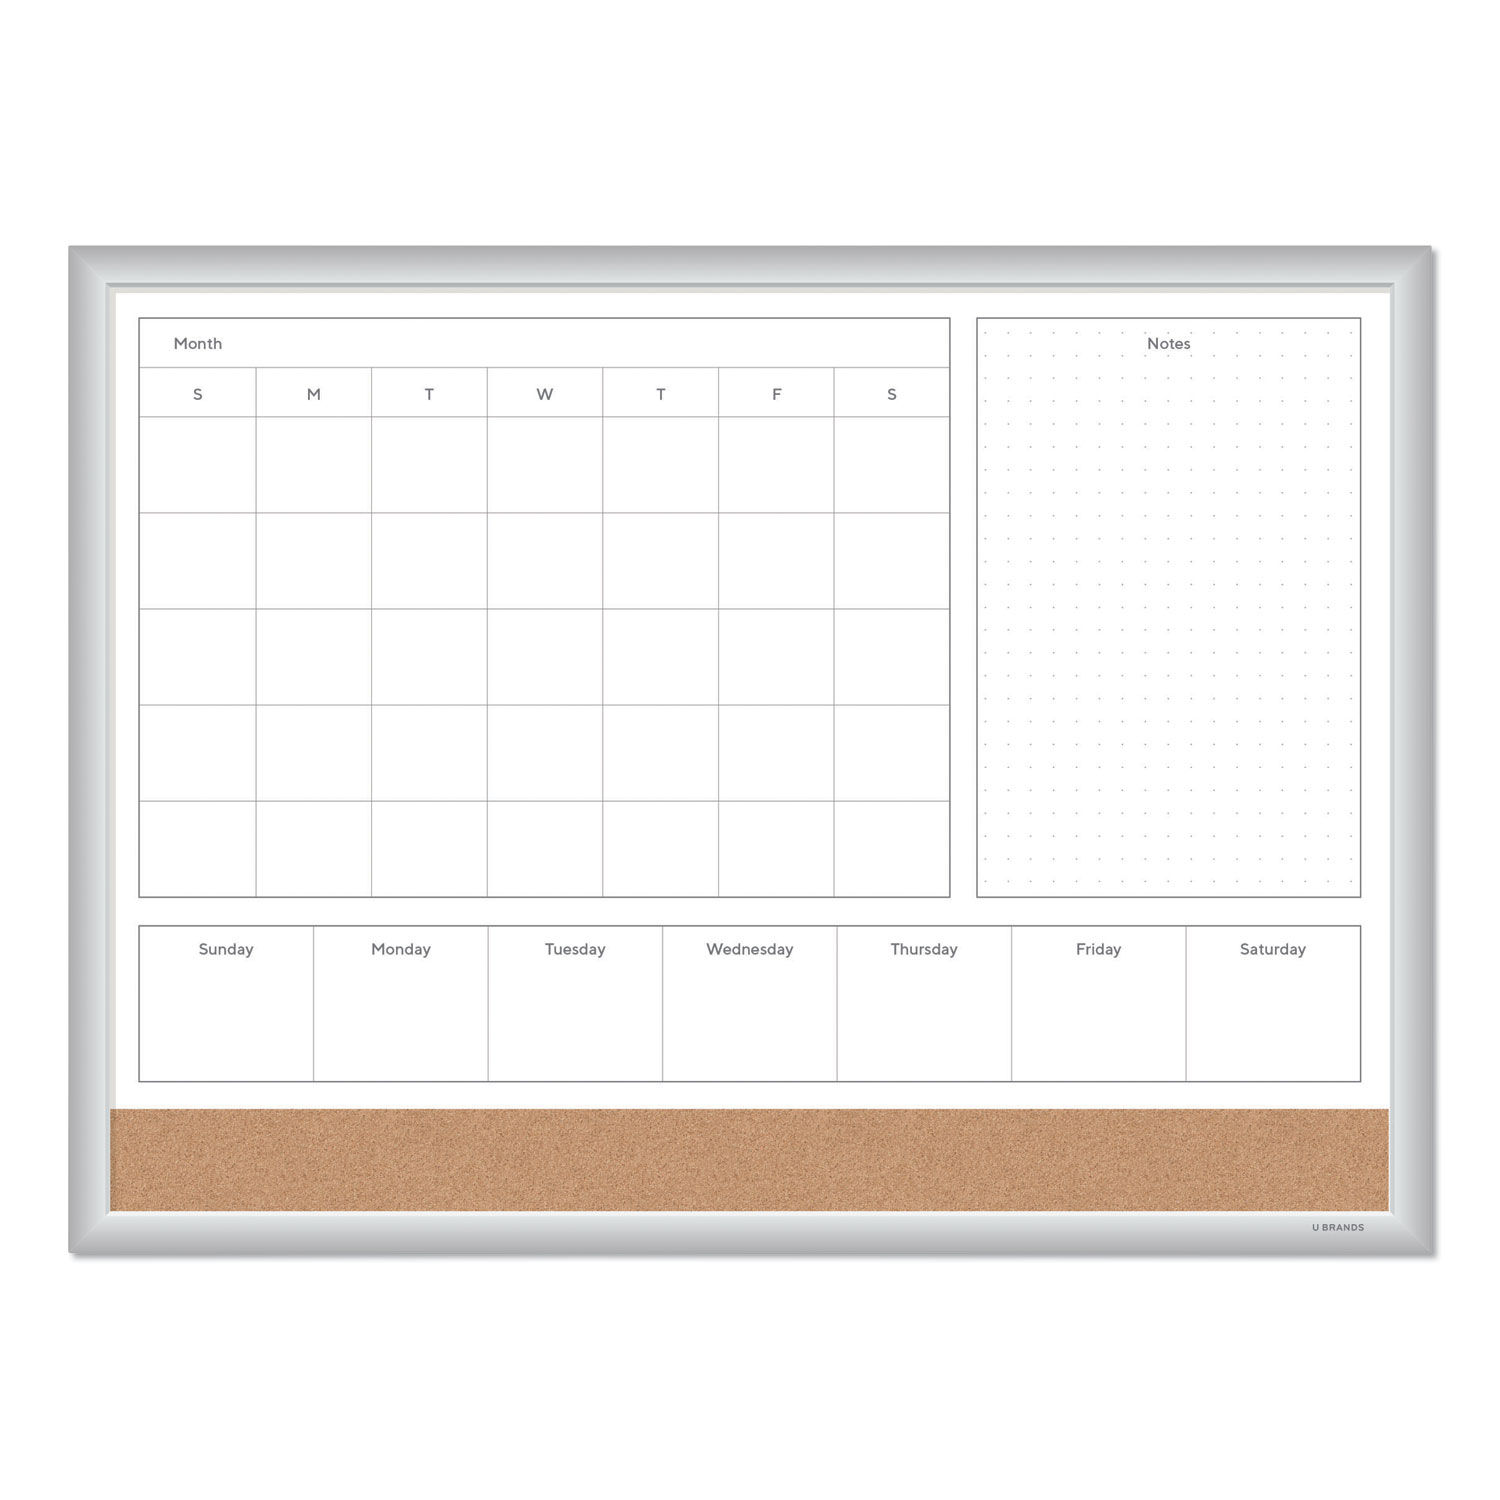 4N1 Magnetic Dry Erase Combo Board 23 x 17, White/Natural